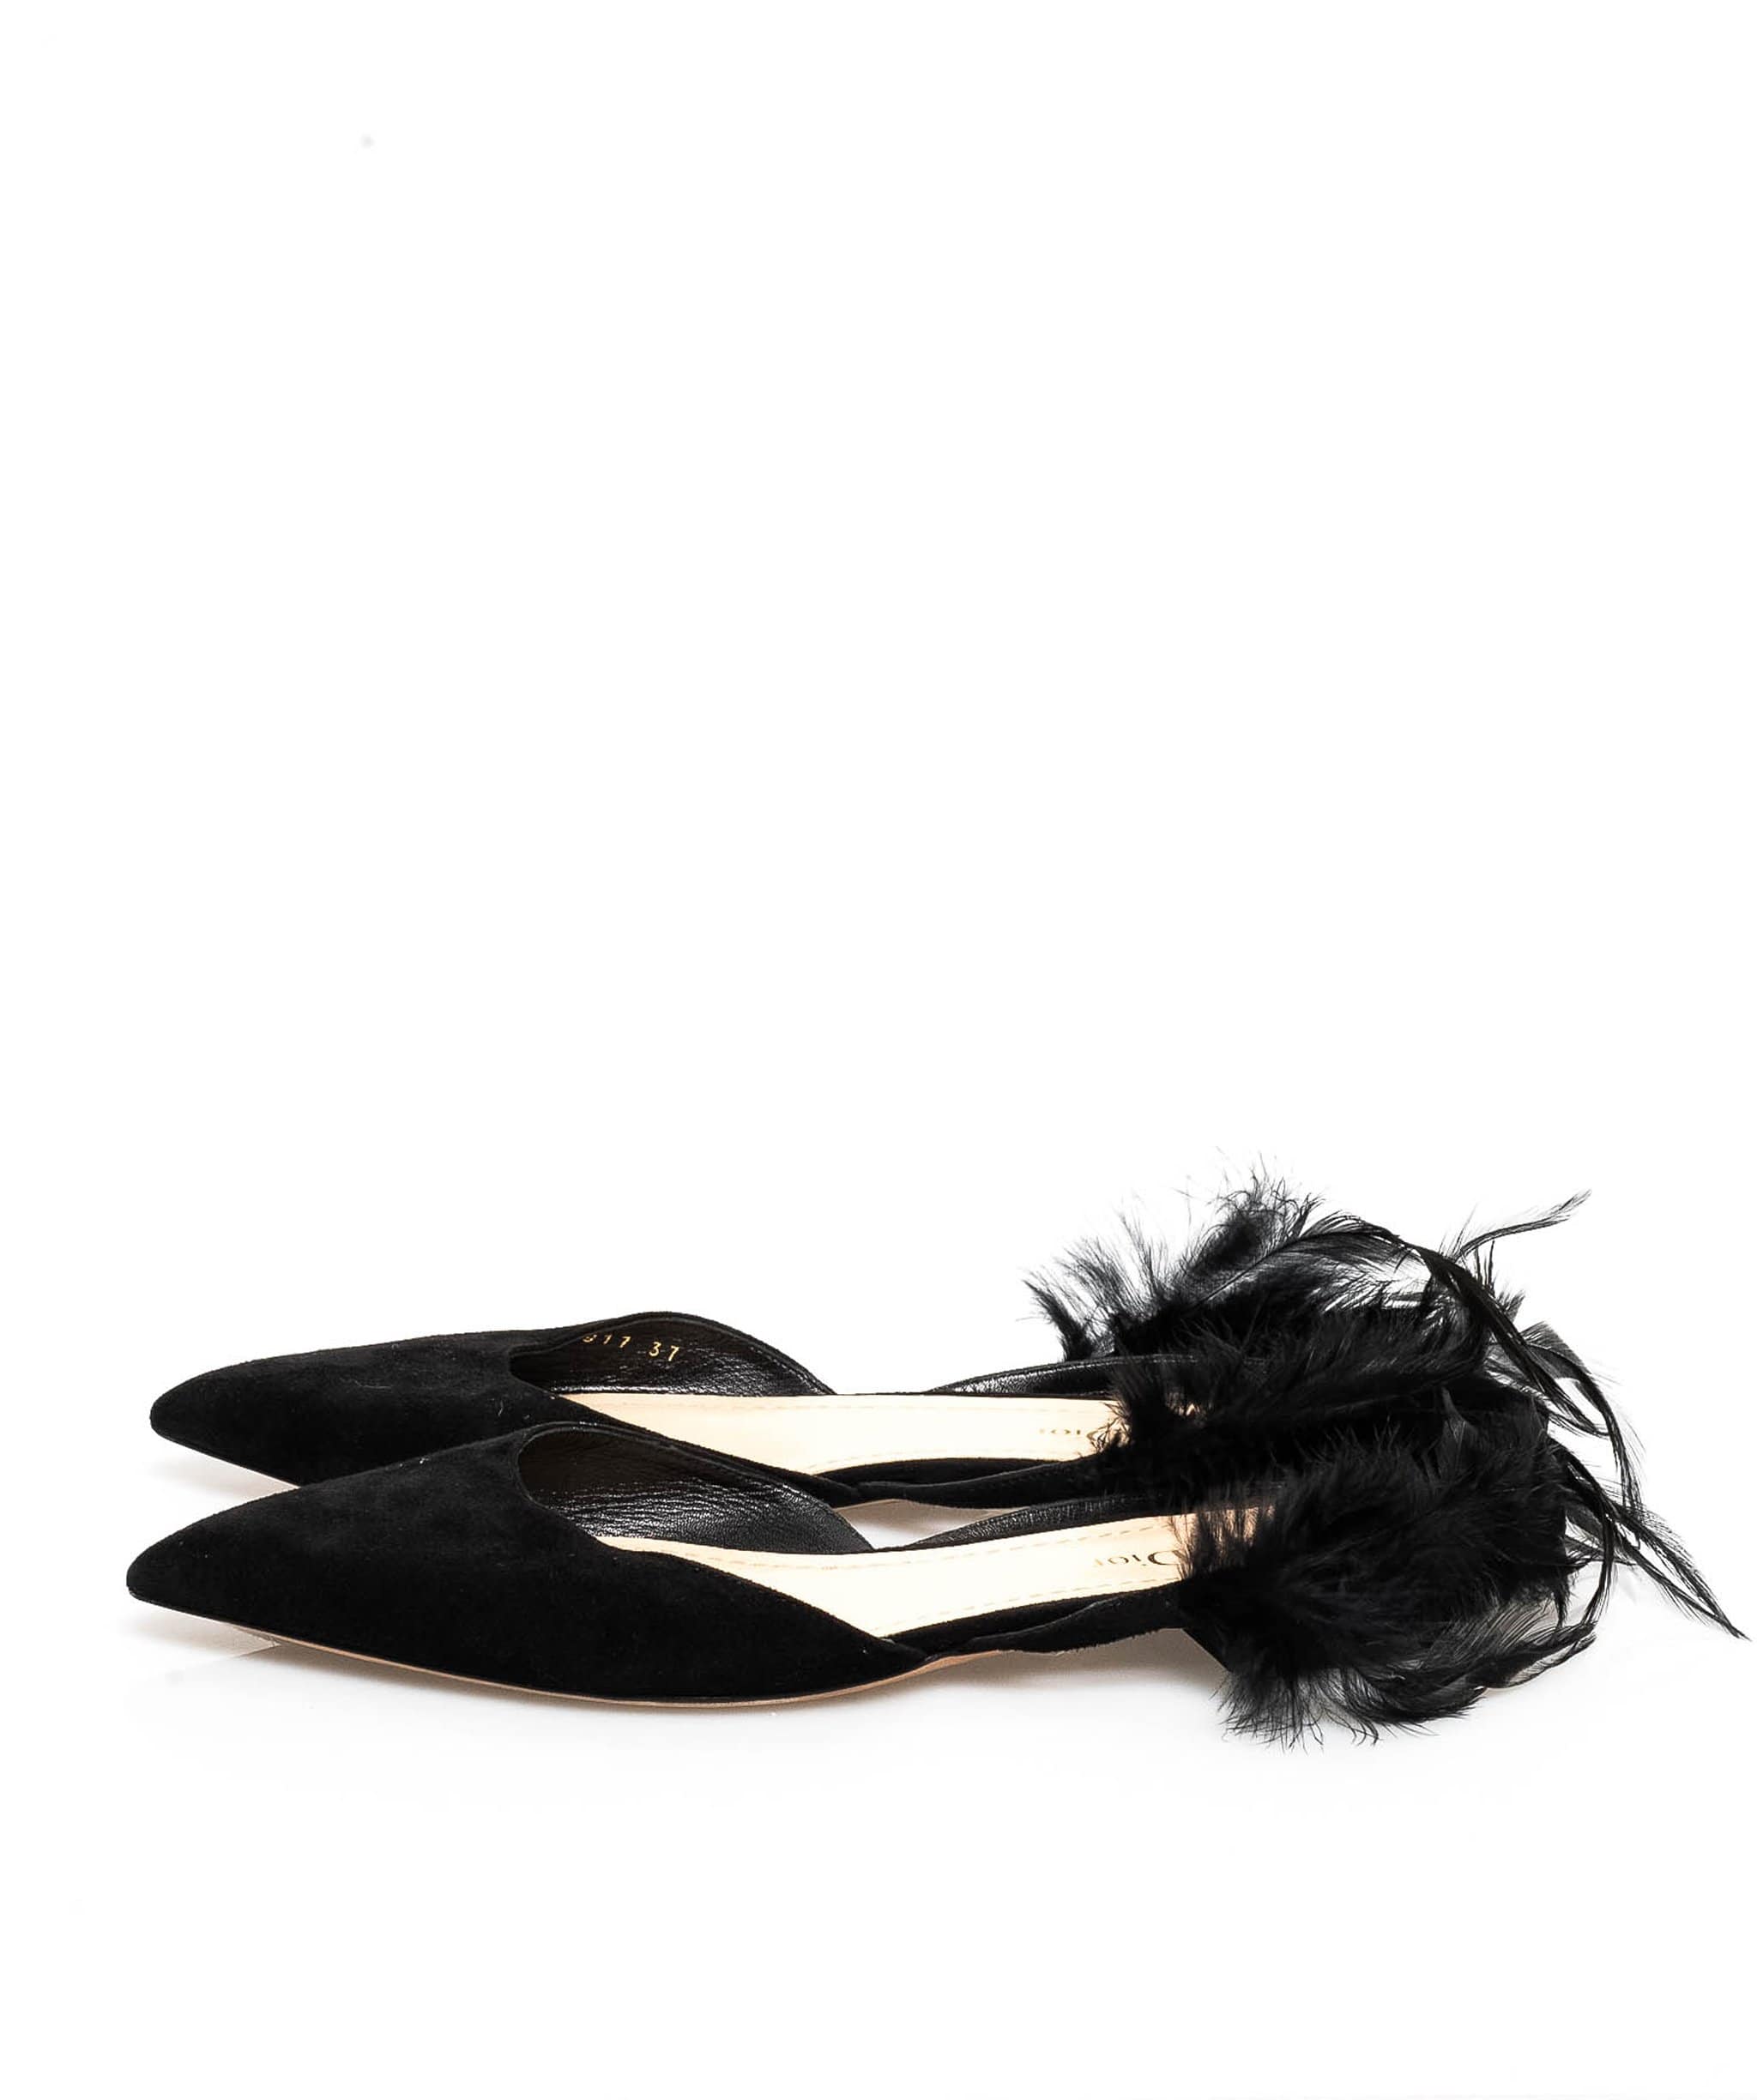 Christian Dior Chistian Dior mules with feathers size 37- MW2132